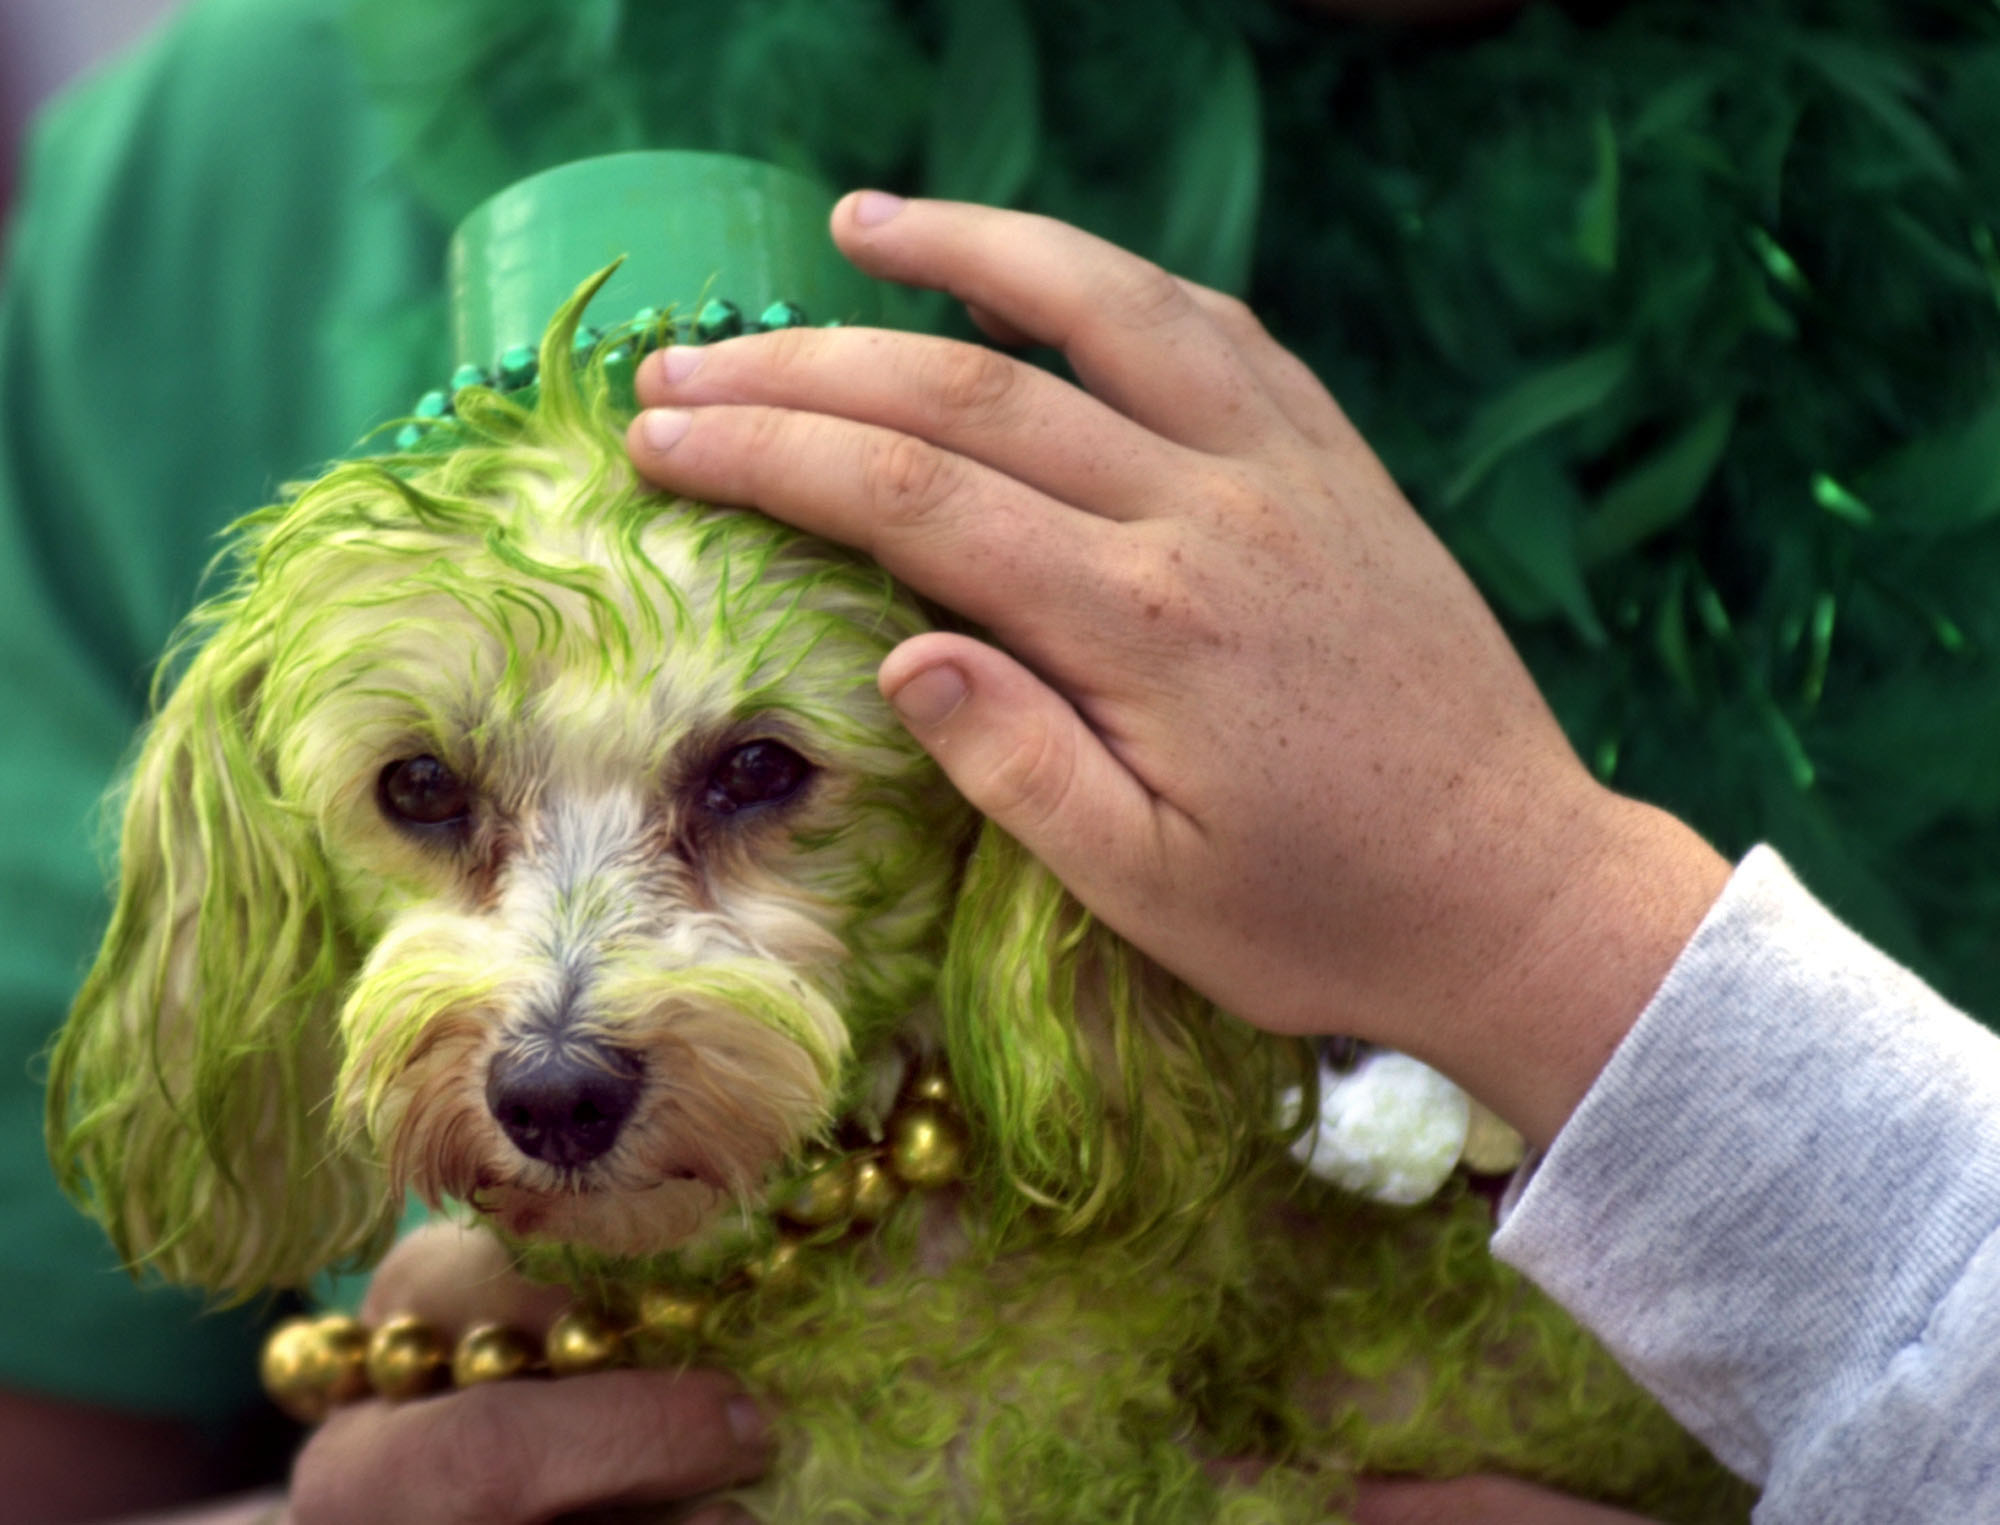 a hand pets a dog dyed green who is wearing a little hat and beads